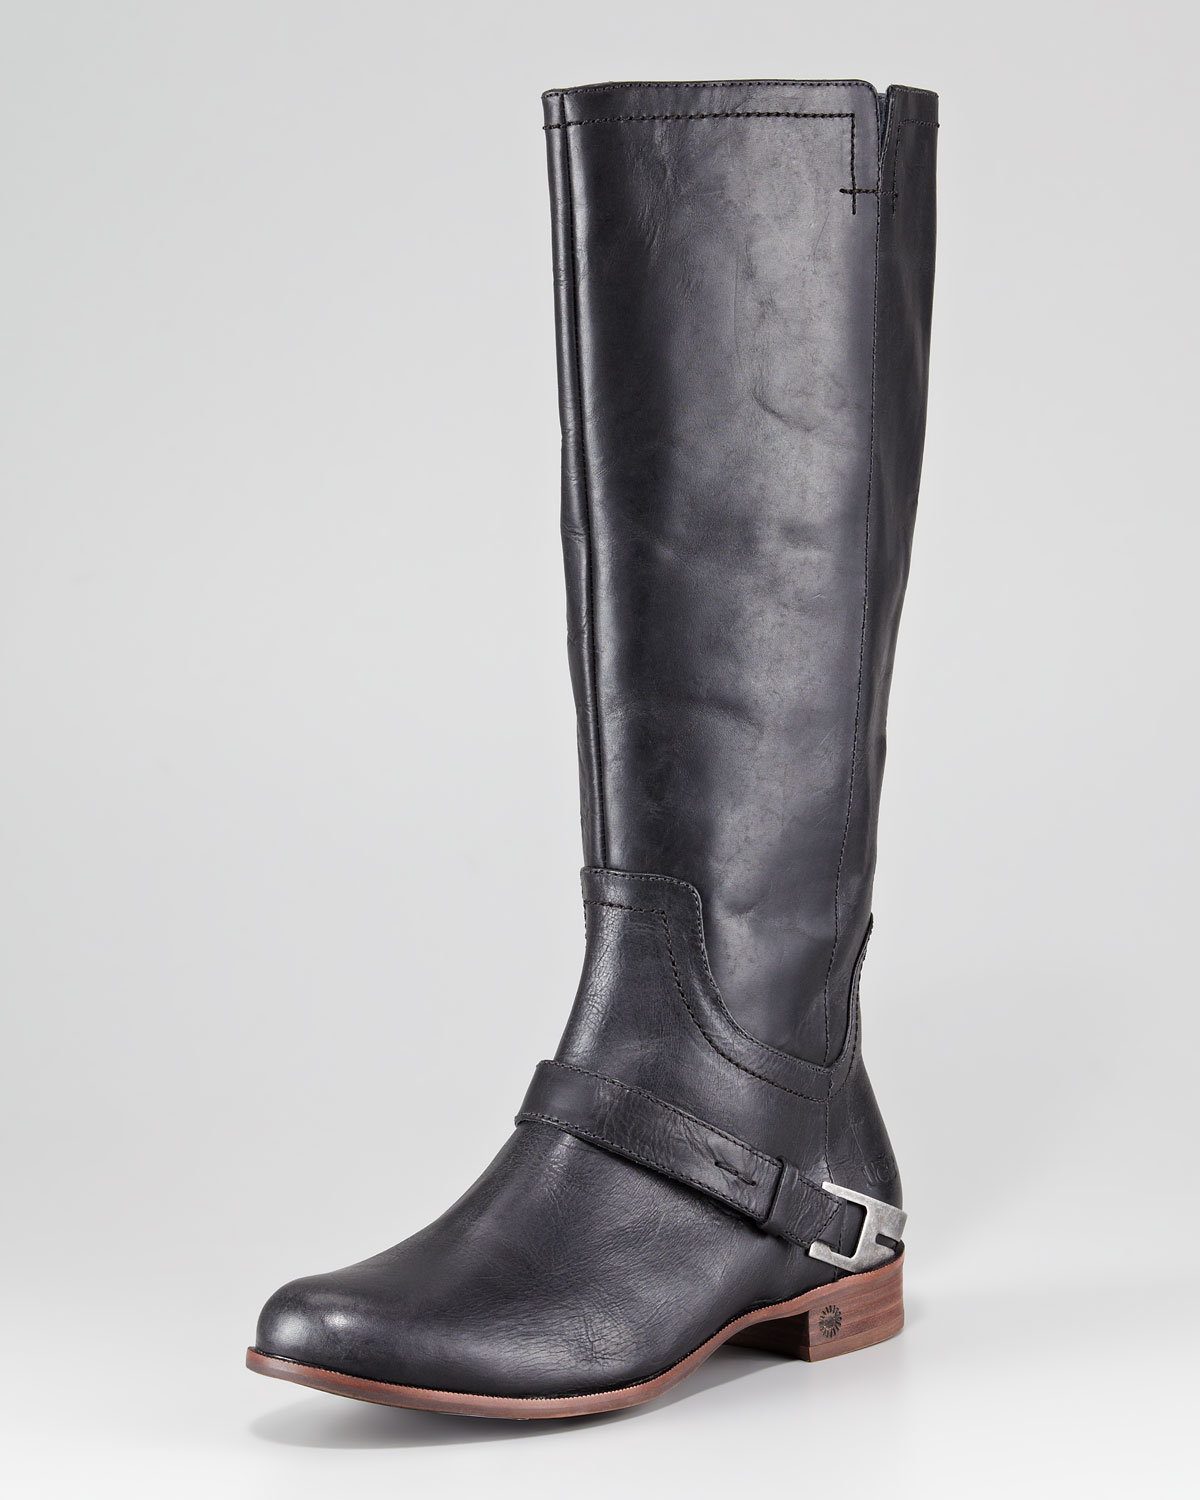 Ugg Channing Ii Leather Riding Boot in Brown (chocolate) | Lyst